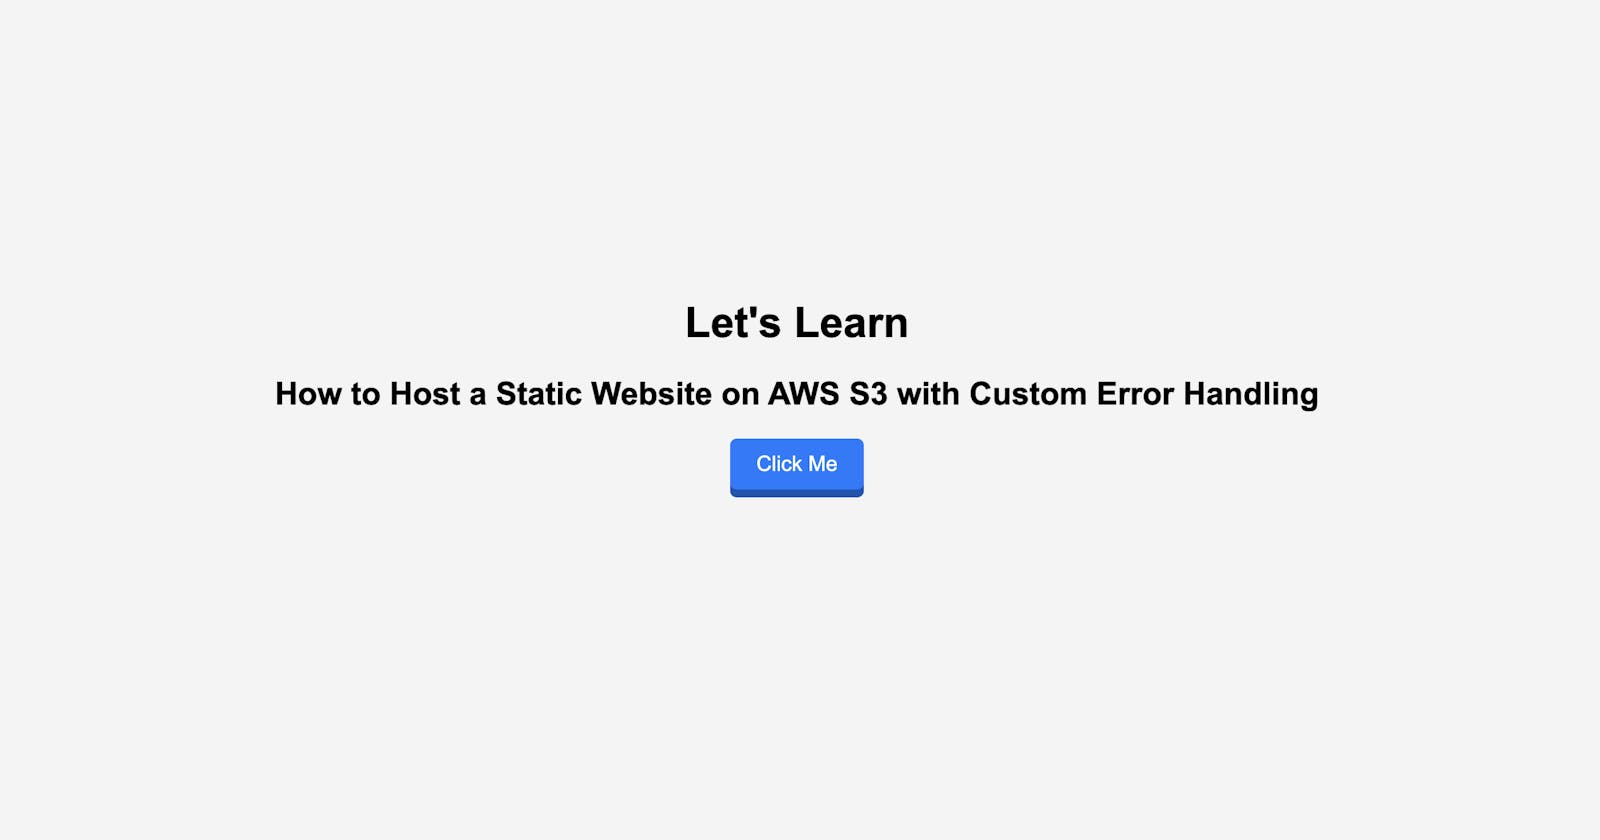 "How to Host a Static Website on AWS S3 with Custom Error Handling"